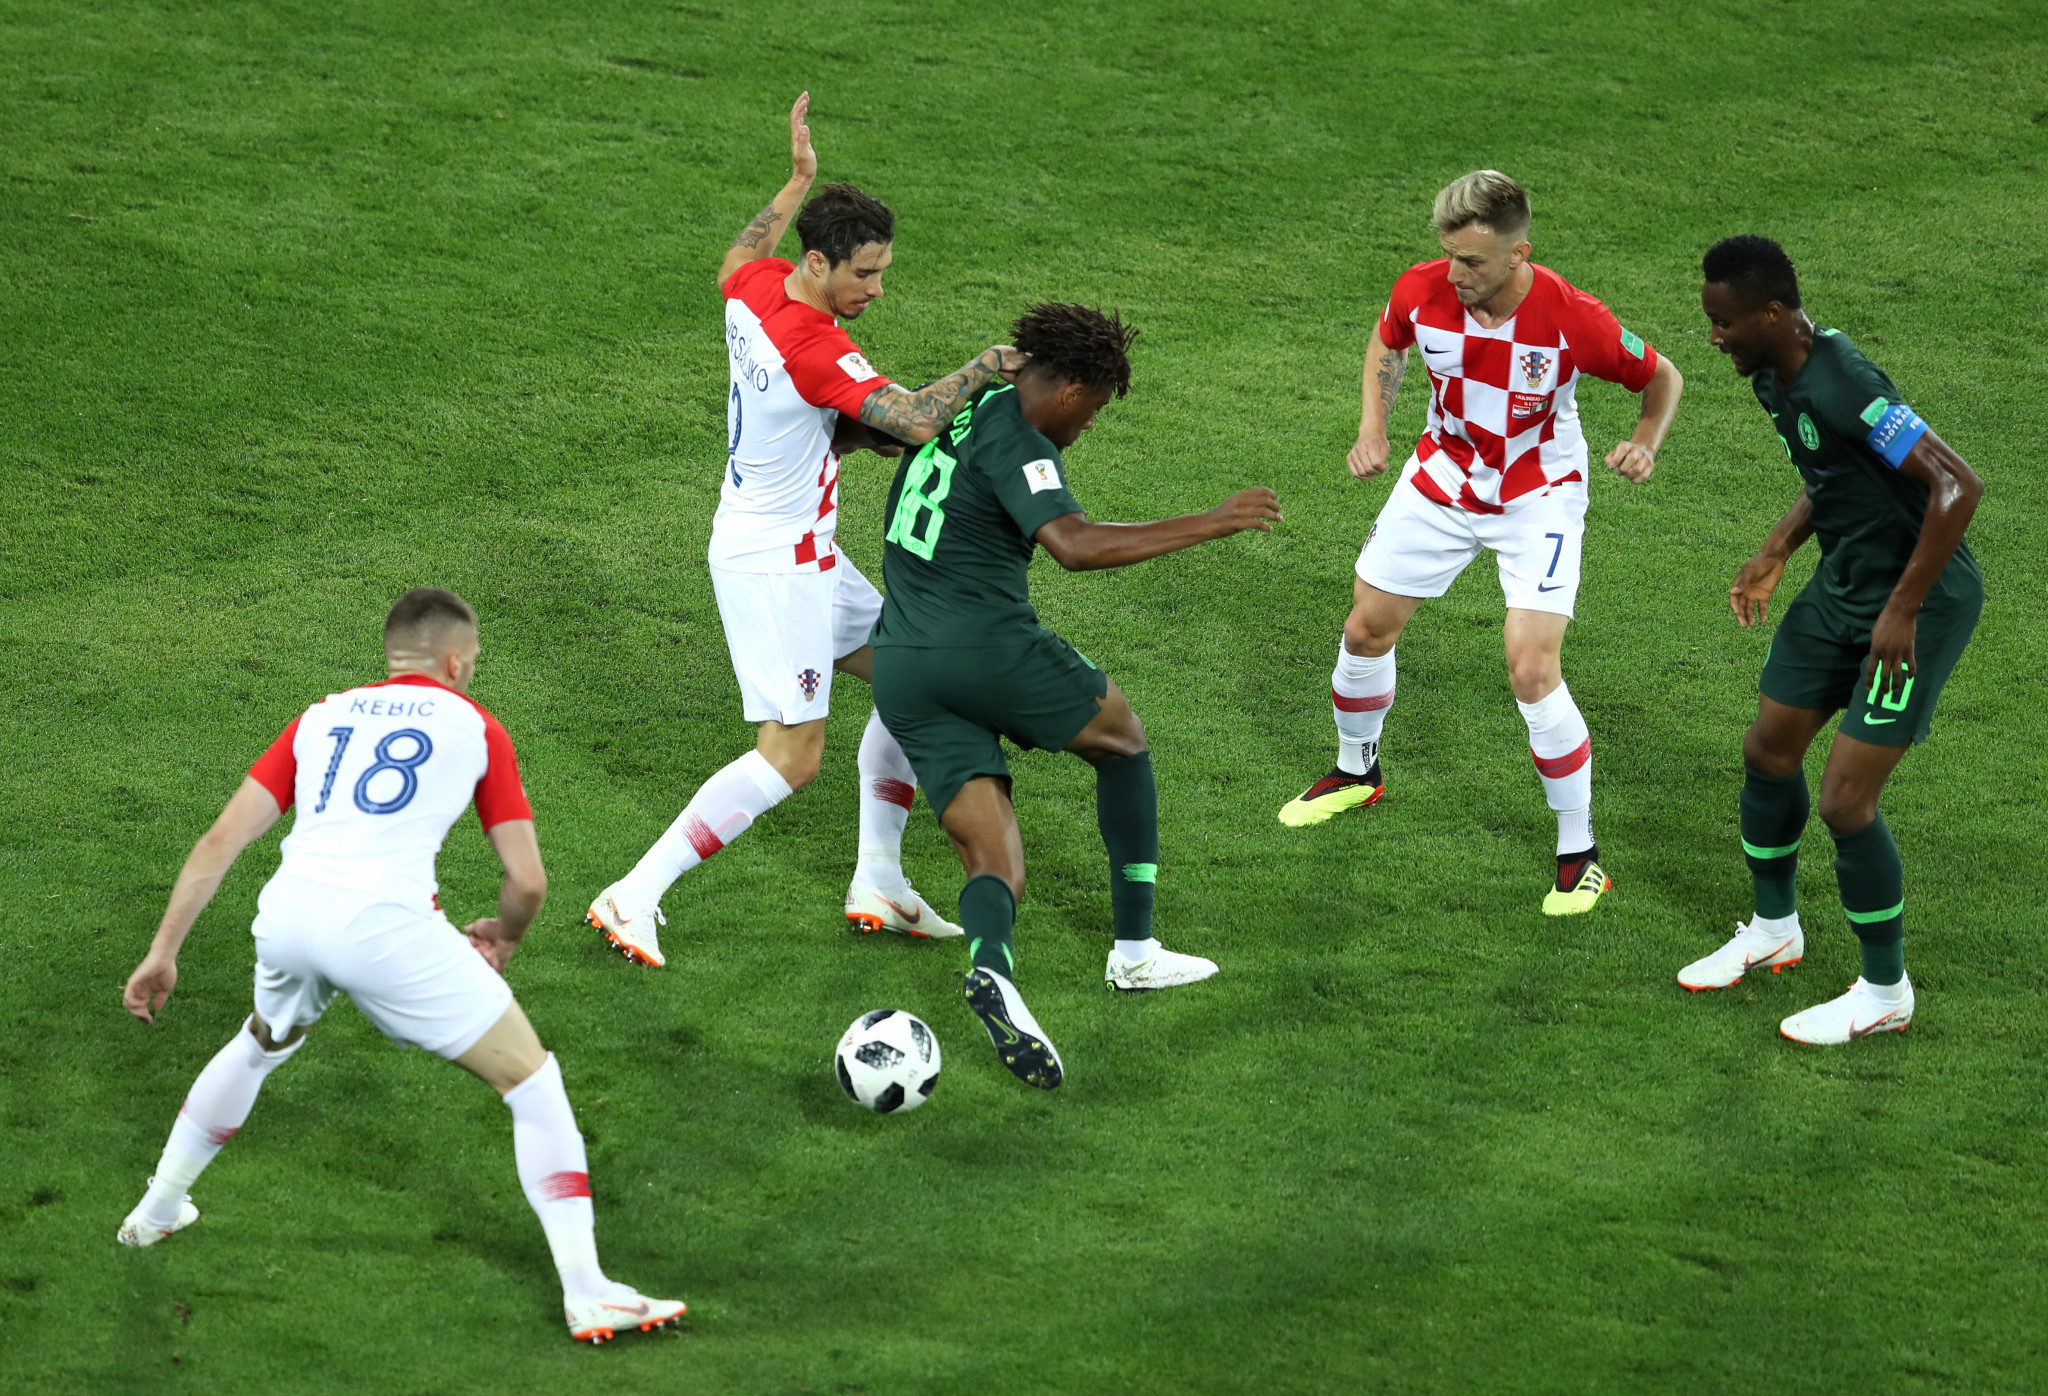 Croatia locked horns with Nigeria in the final match of the day 